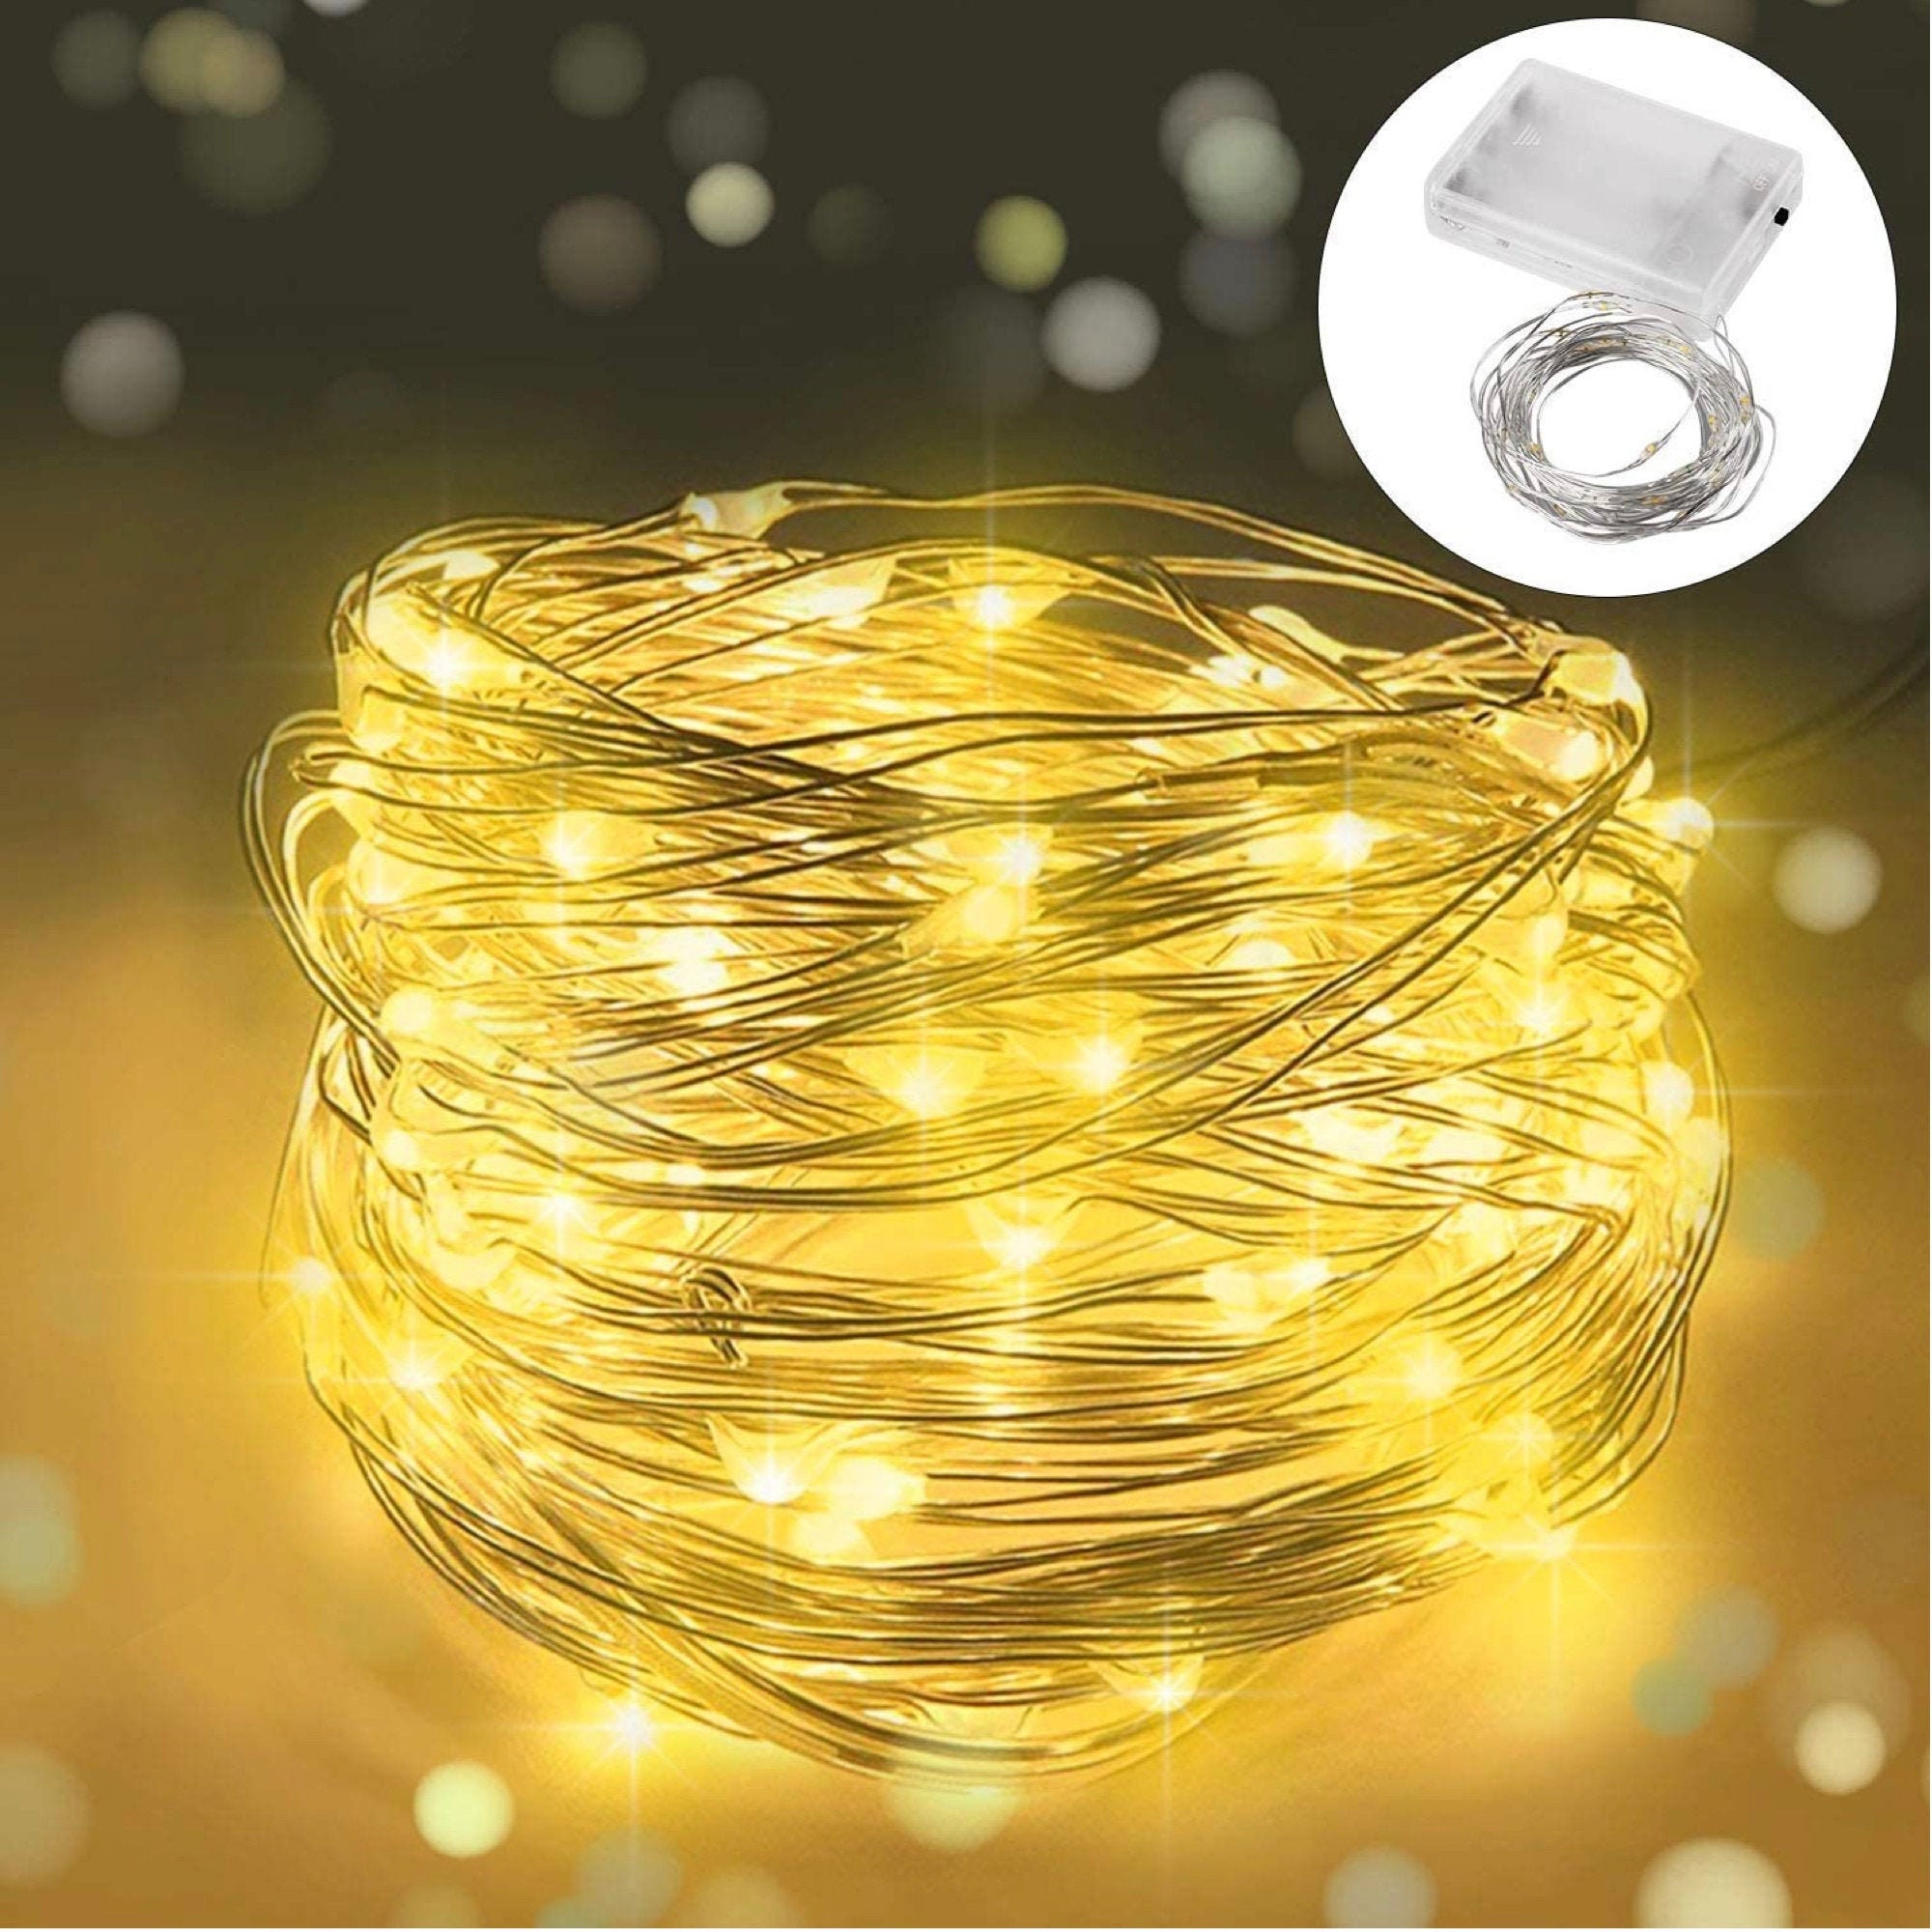 20/50/100 LEDs Battery Operated Mini LED Copper Wire String Fairy Lights 5M/10M 